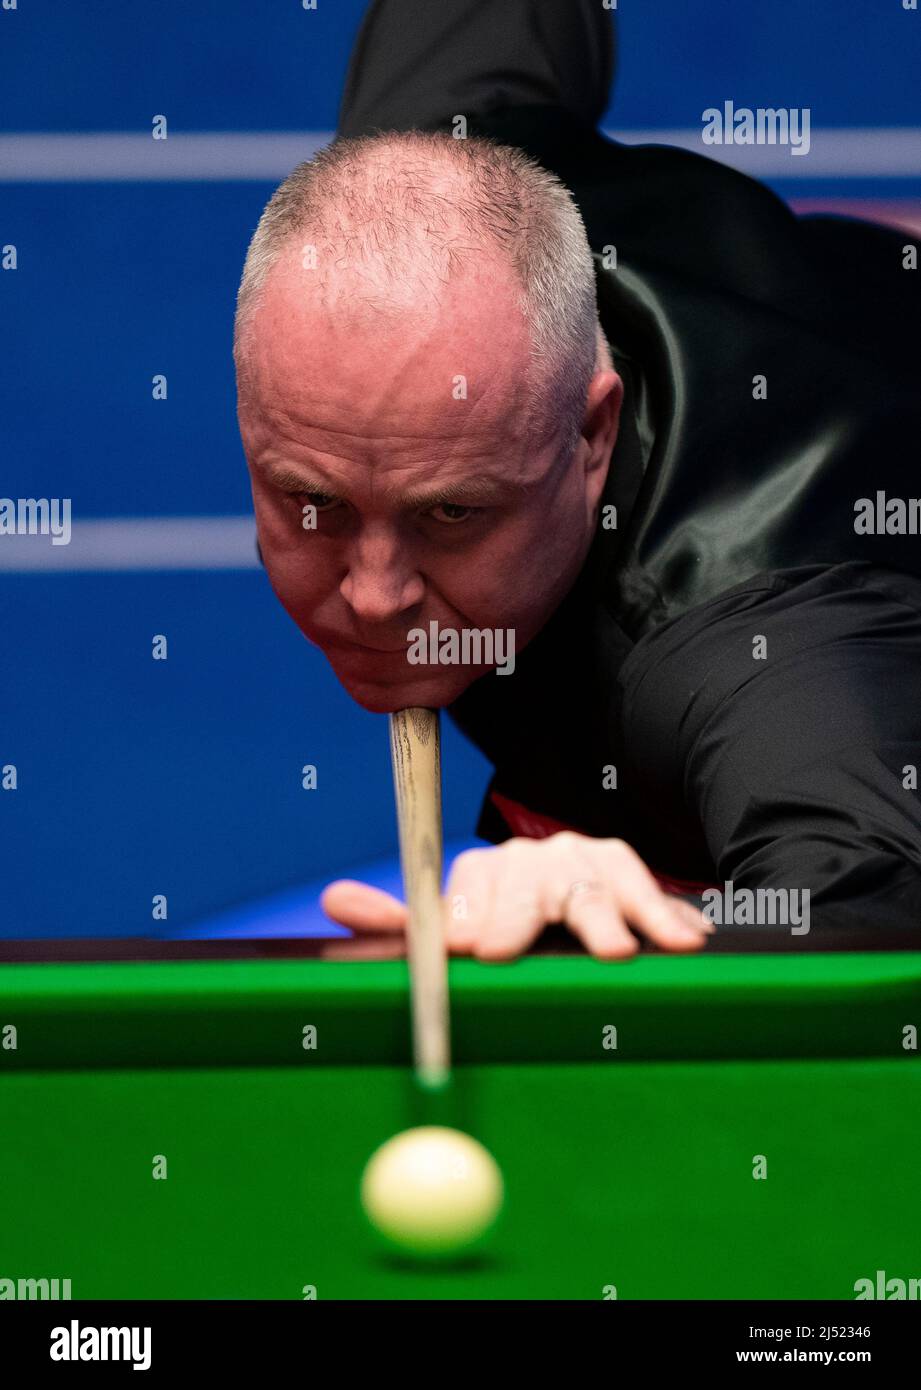 John Higgins during his match against Thepchaiya Un-Nooh during day four of the Betfred World Snooker Championships at The Crucible, Sheffield